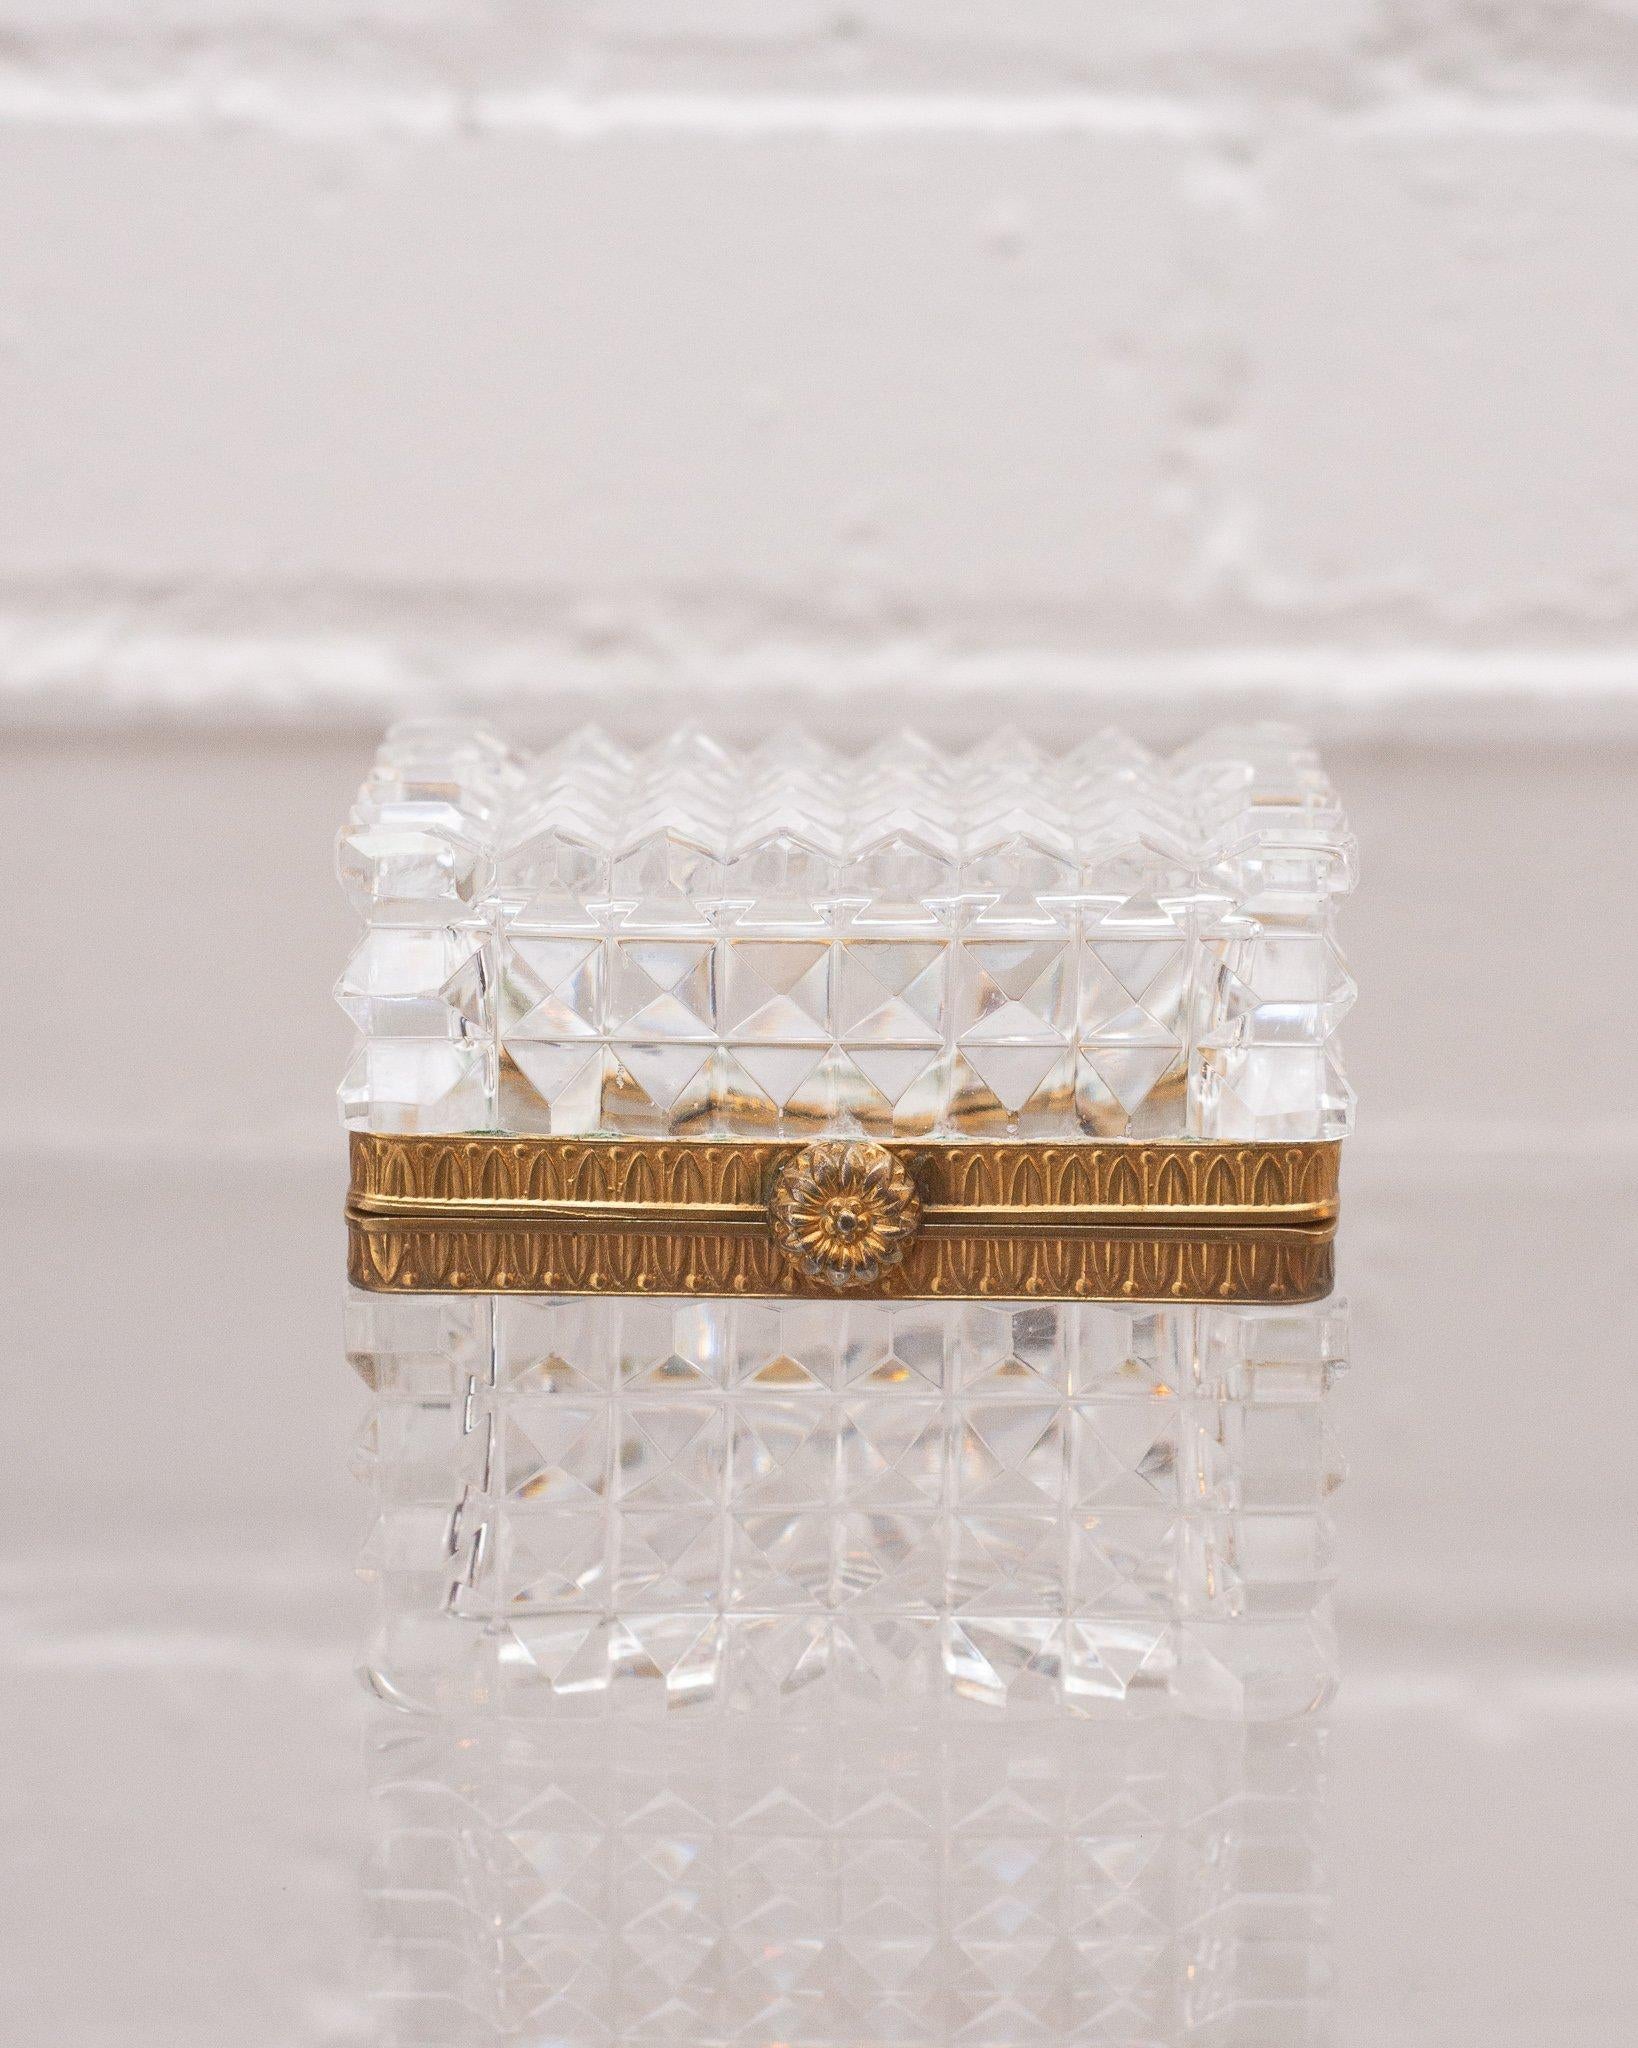 This antique pointed cut crystal and bronze box makes a statement in any space. An early 1900s French production, this piece transitions from modern to classic interiors seamlessly with its sophisticated shape and light catching quality.